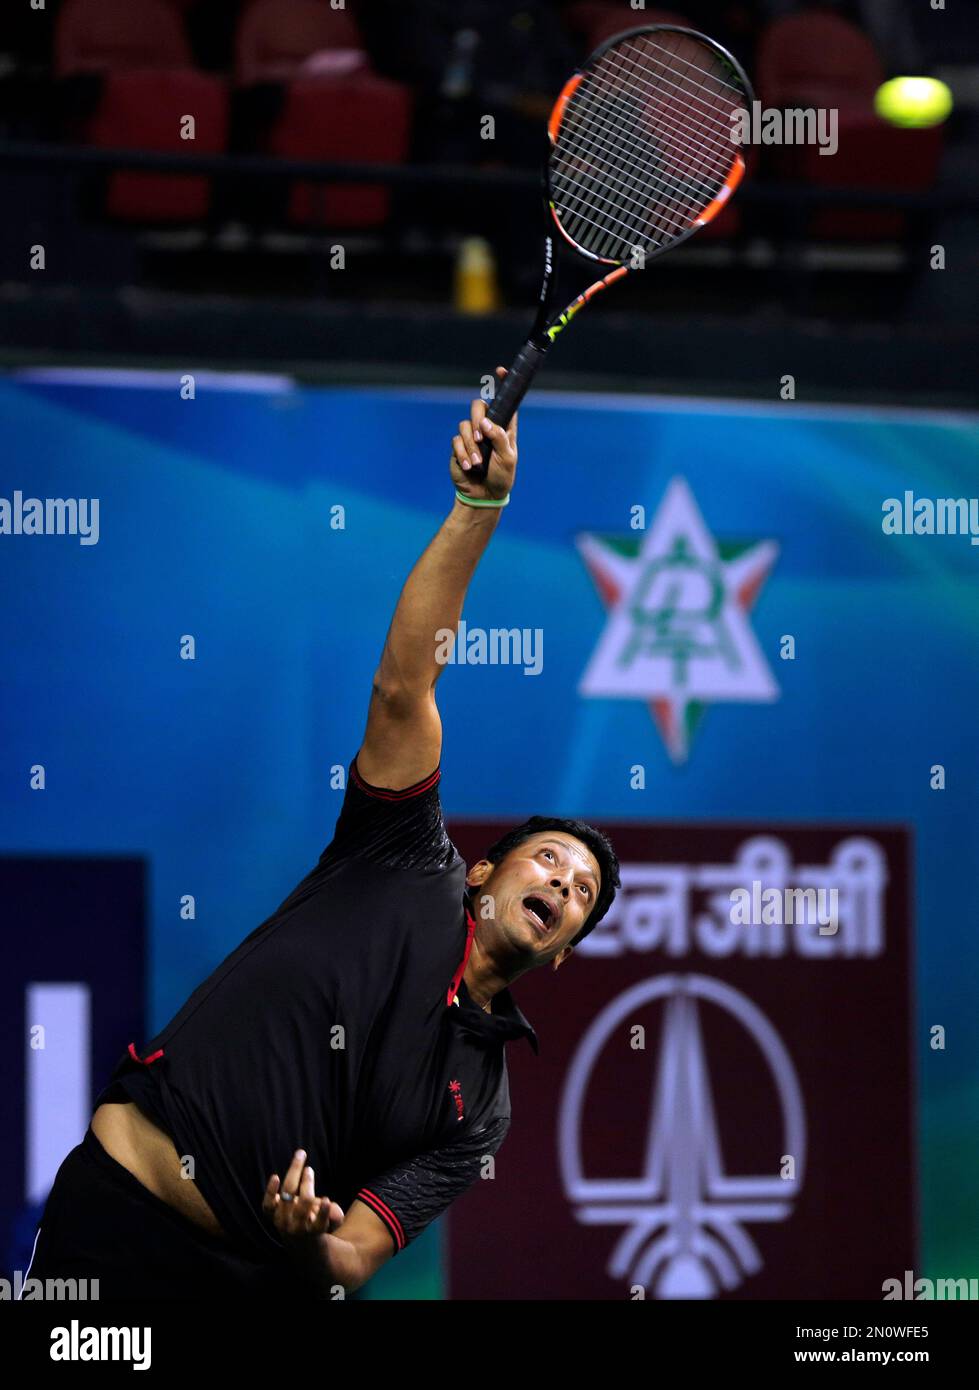 Indian tennis player Mahesh Bhupathi serves during an exhibition mixed  doubles match against Martina Navratilova and Leander Paes to promote International  Premier Tennis League (IPTL) in New Delhi, India, Friday, Nov. 27,